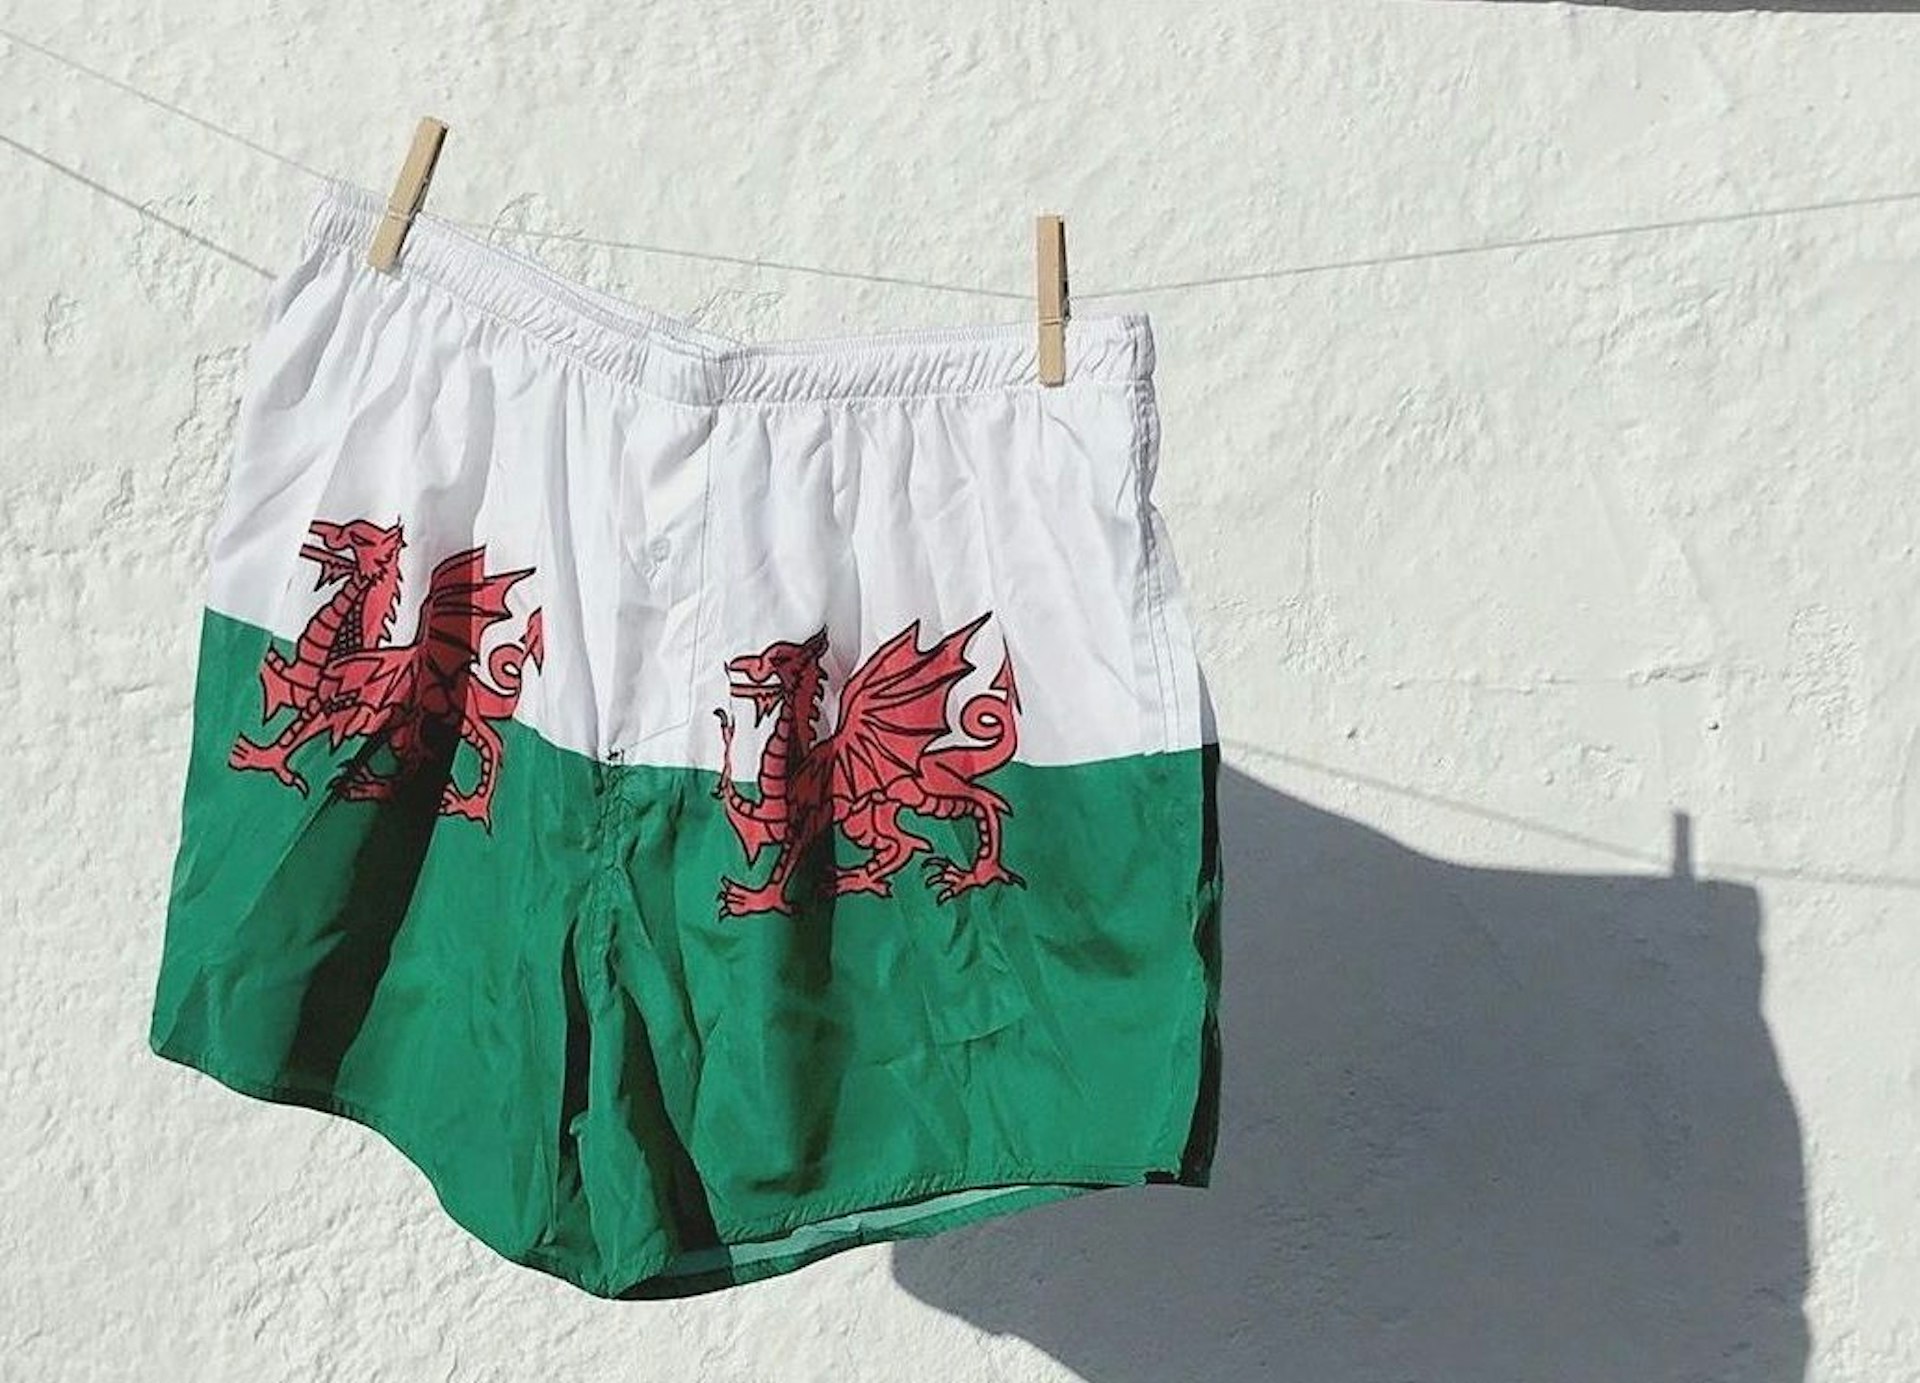 The Welsh creatives embracing their heritage in lockdown